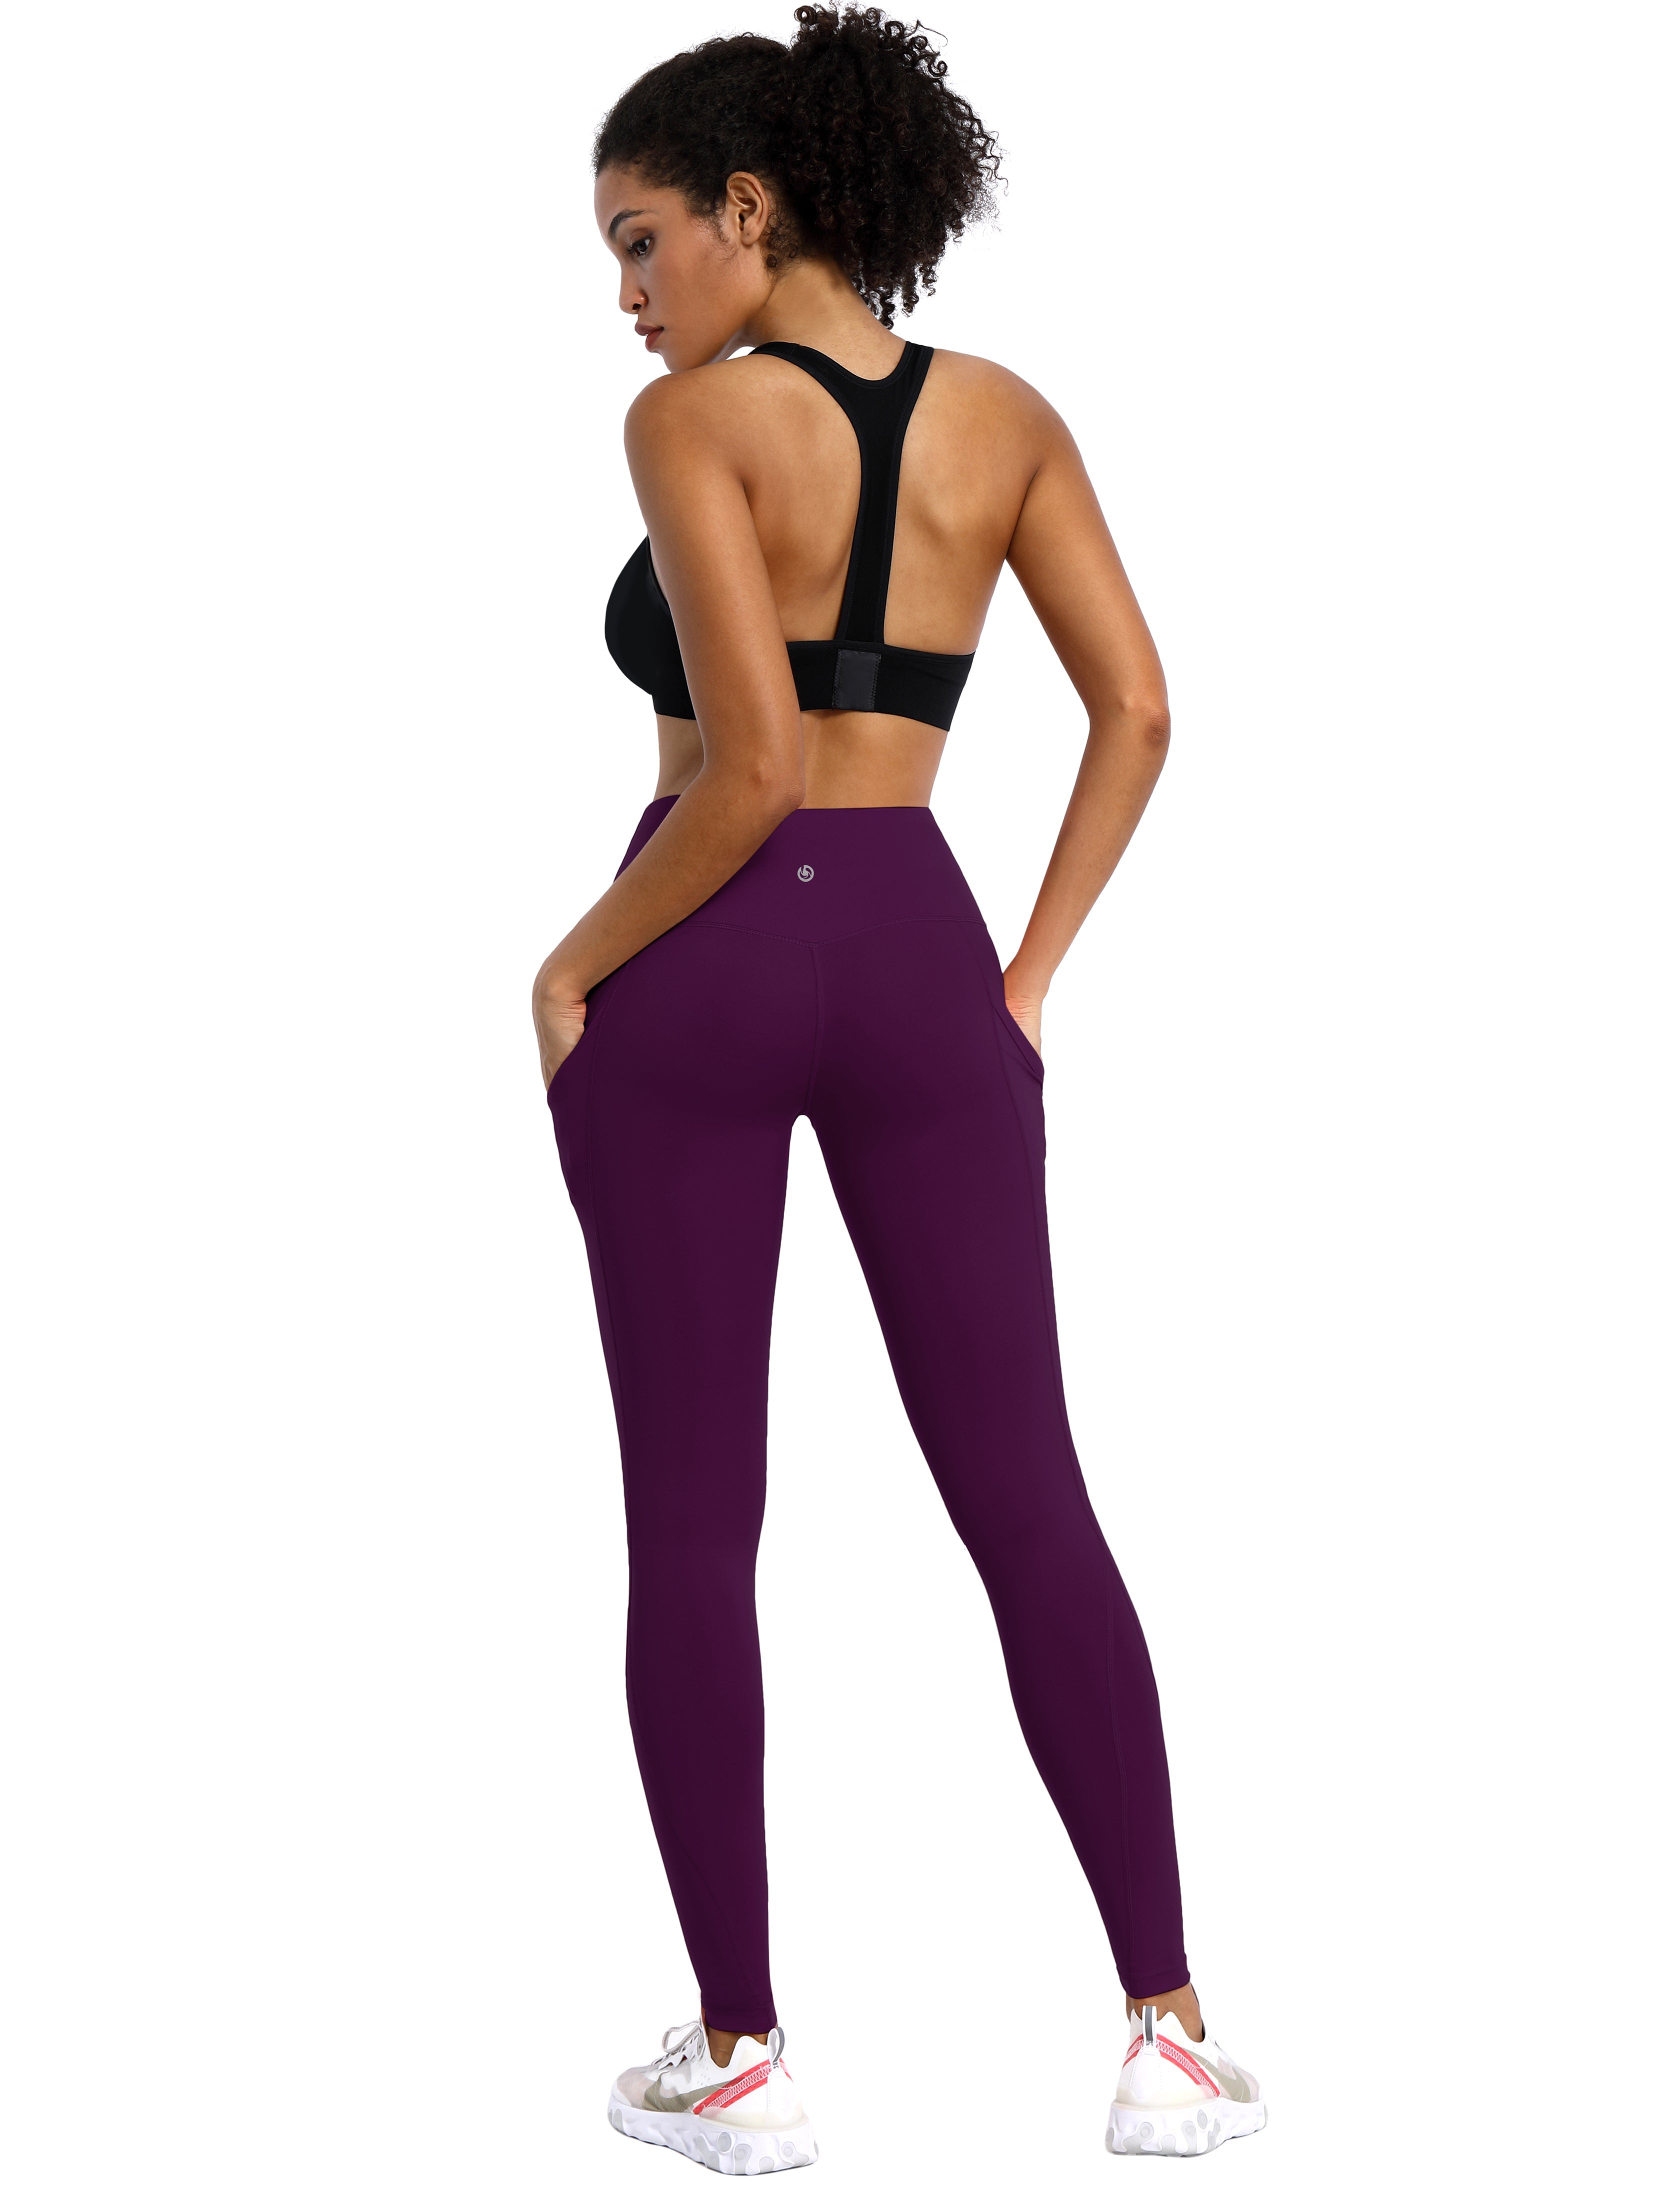 High Waist Side Pockets Jogging Pants plum 75% Nylon, 25% Spandex Fabric doesn't attract lint easily 4-way stretch No see-through Moisture-wicking Tummy control Inner pocket